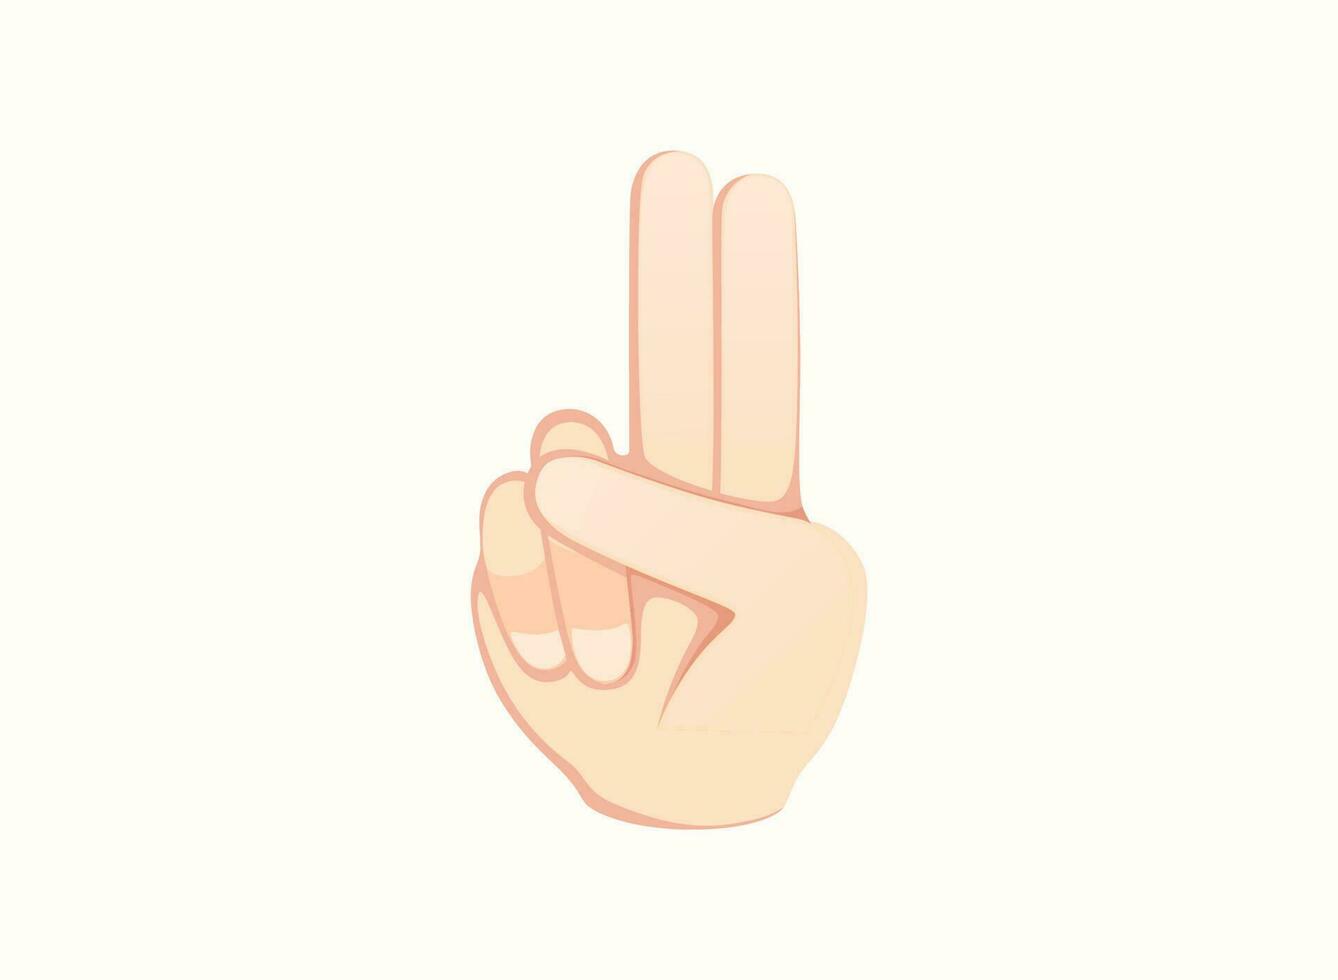 Hand points with two fingers icon. Hand gesture emoji vector illustration.